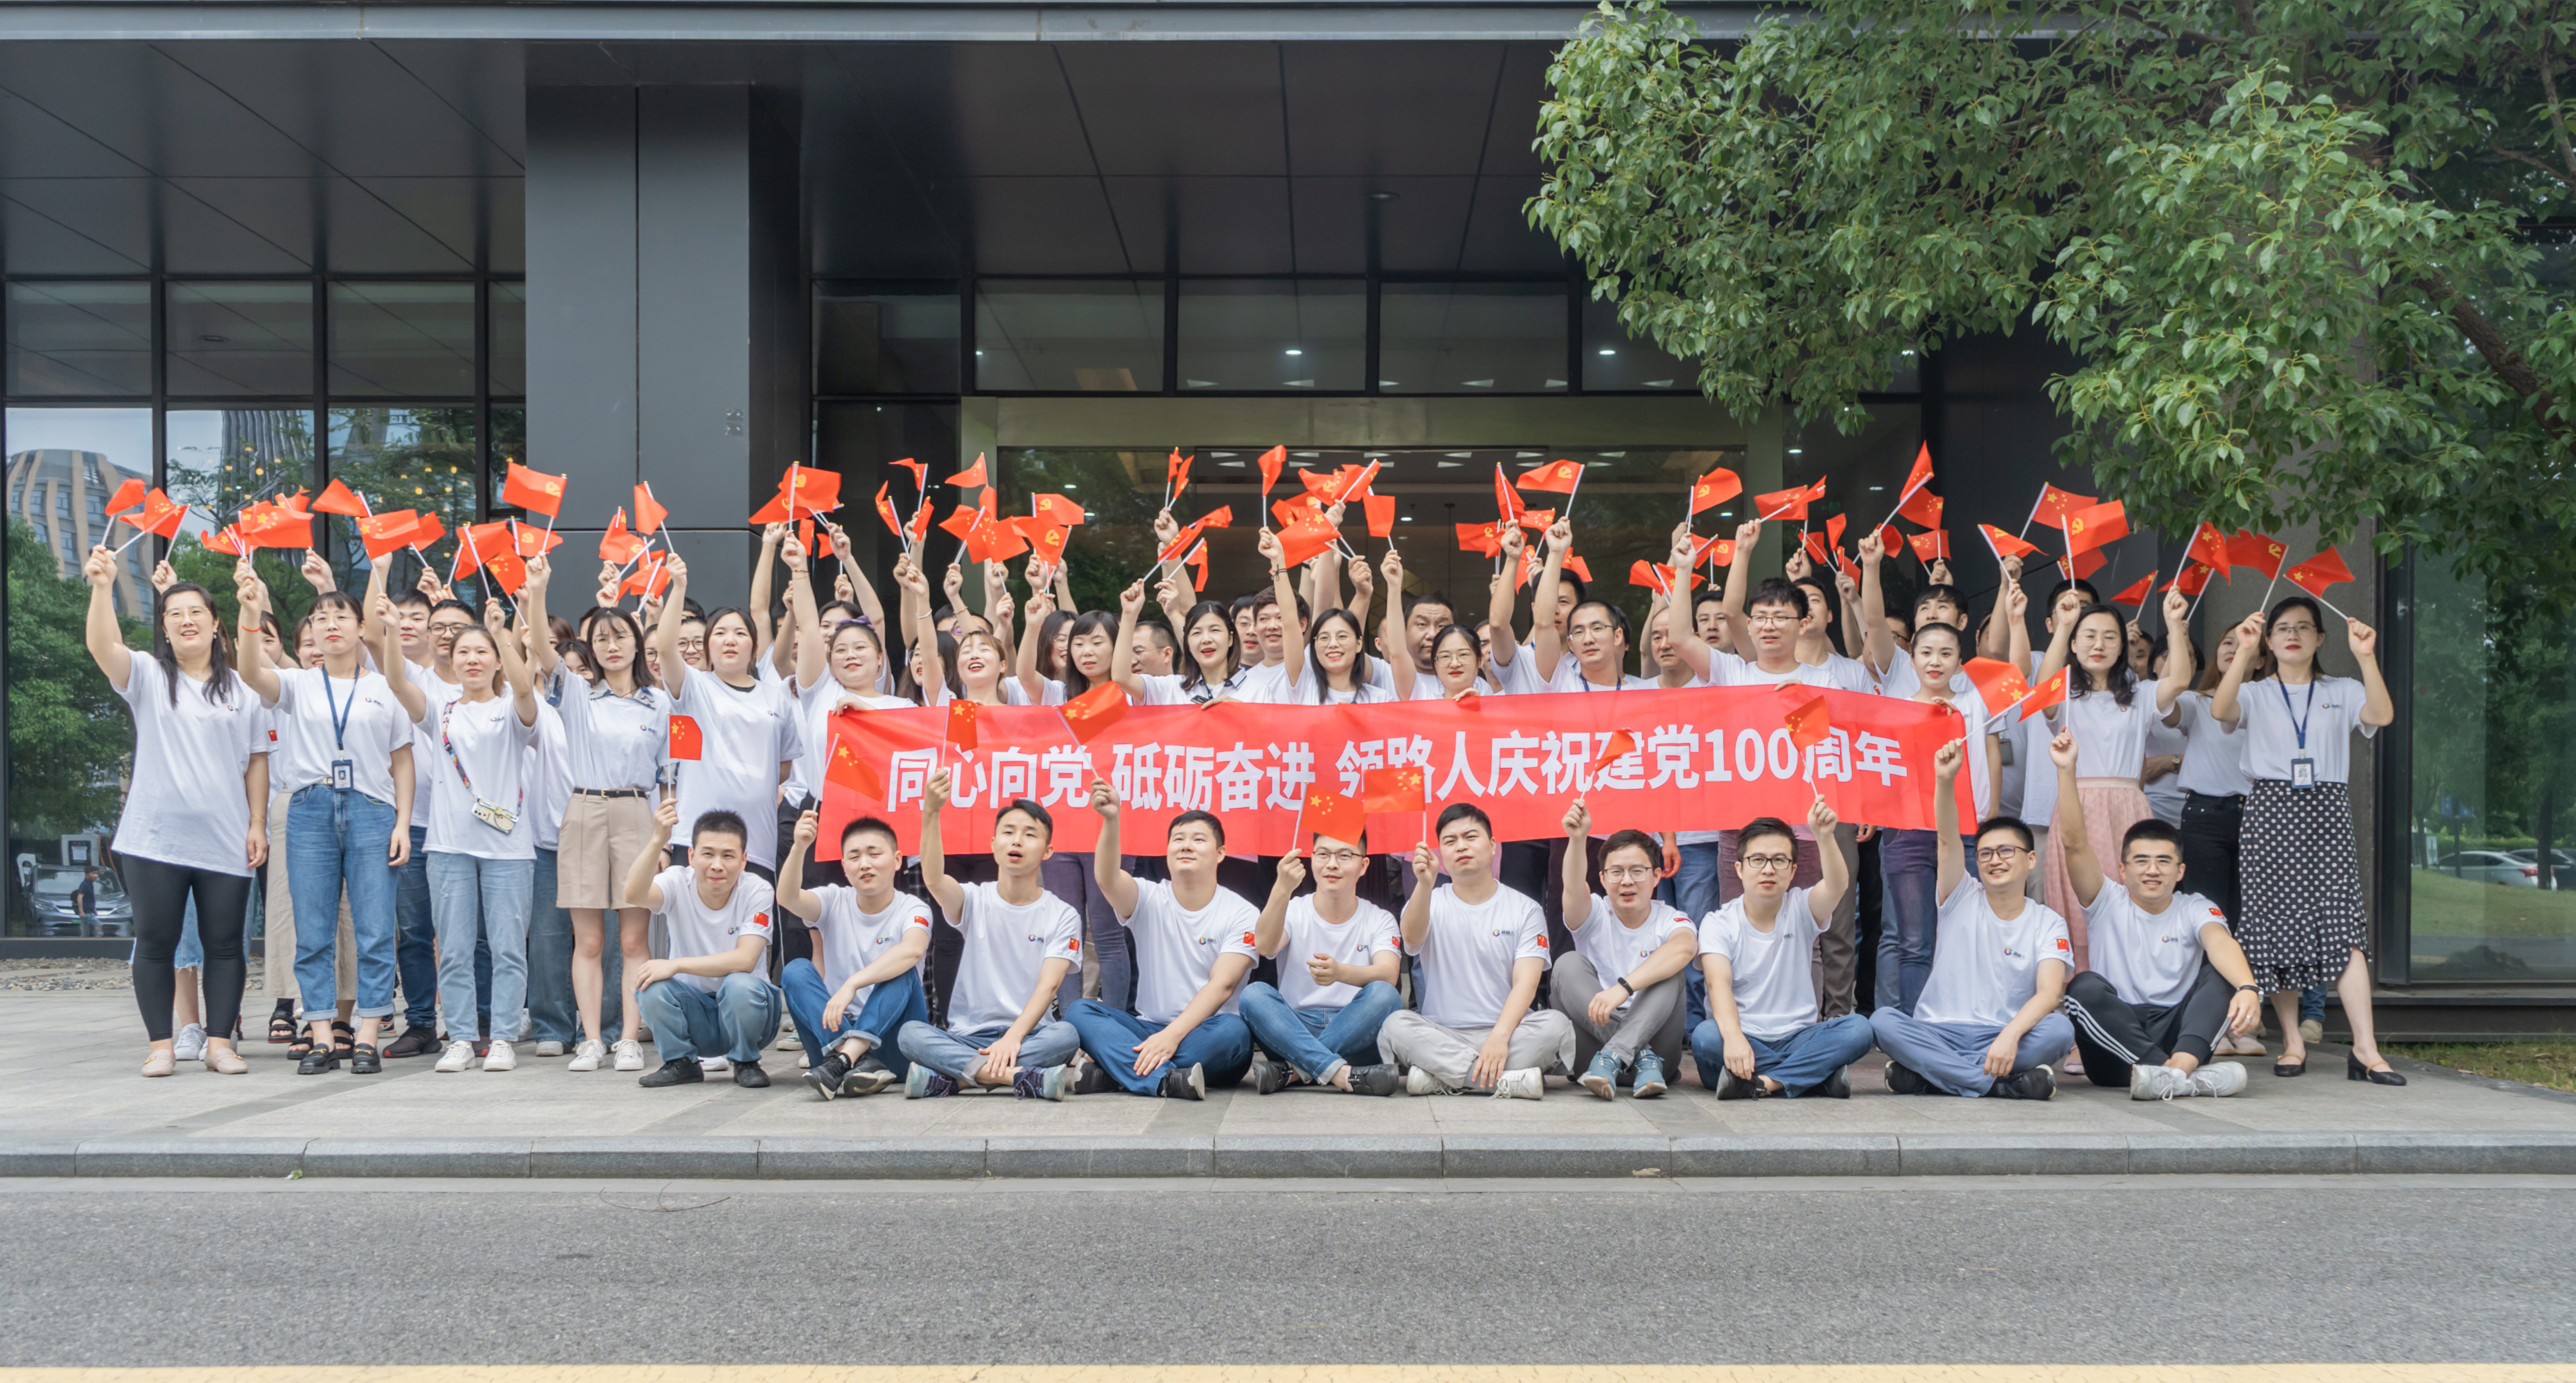 Follow the Party With One Heart, Forge Ahead | Guide Group warmly celebrates the 100th anniversary of the founding of the Communist Party of China!